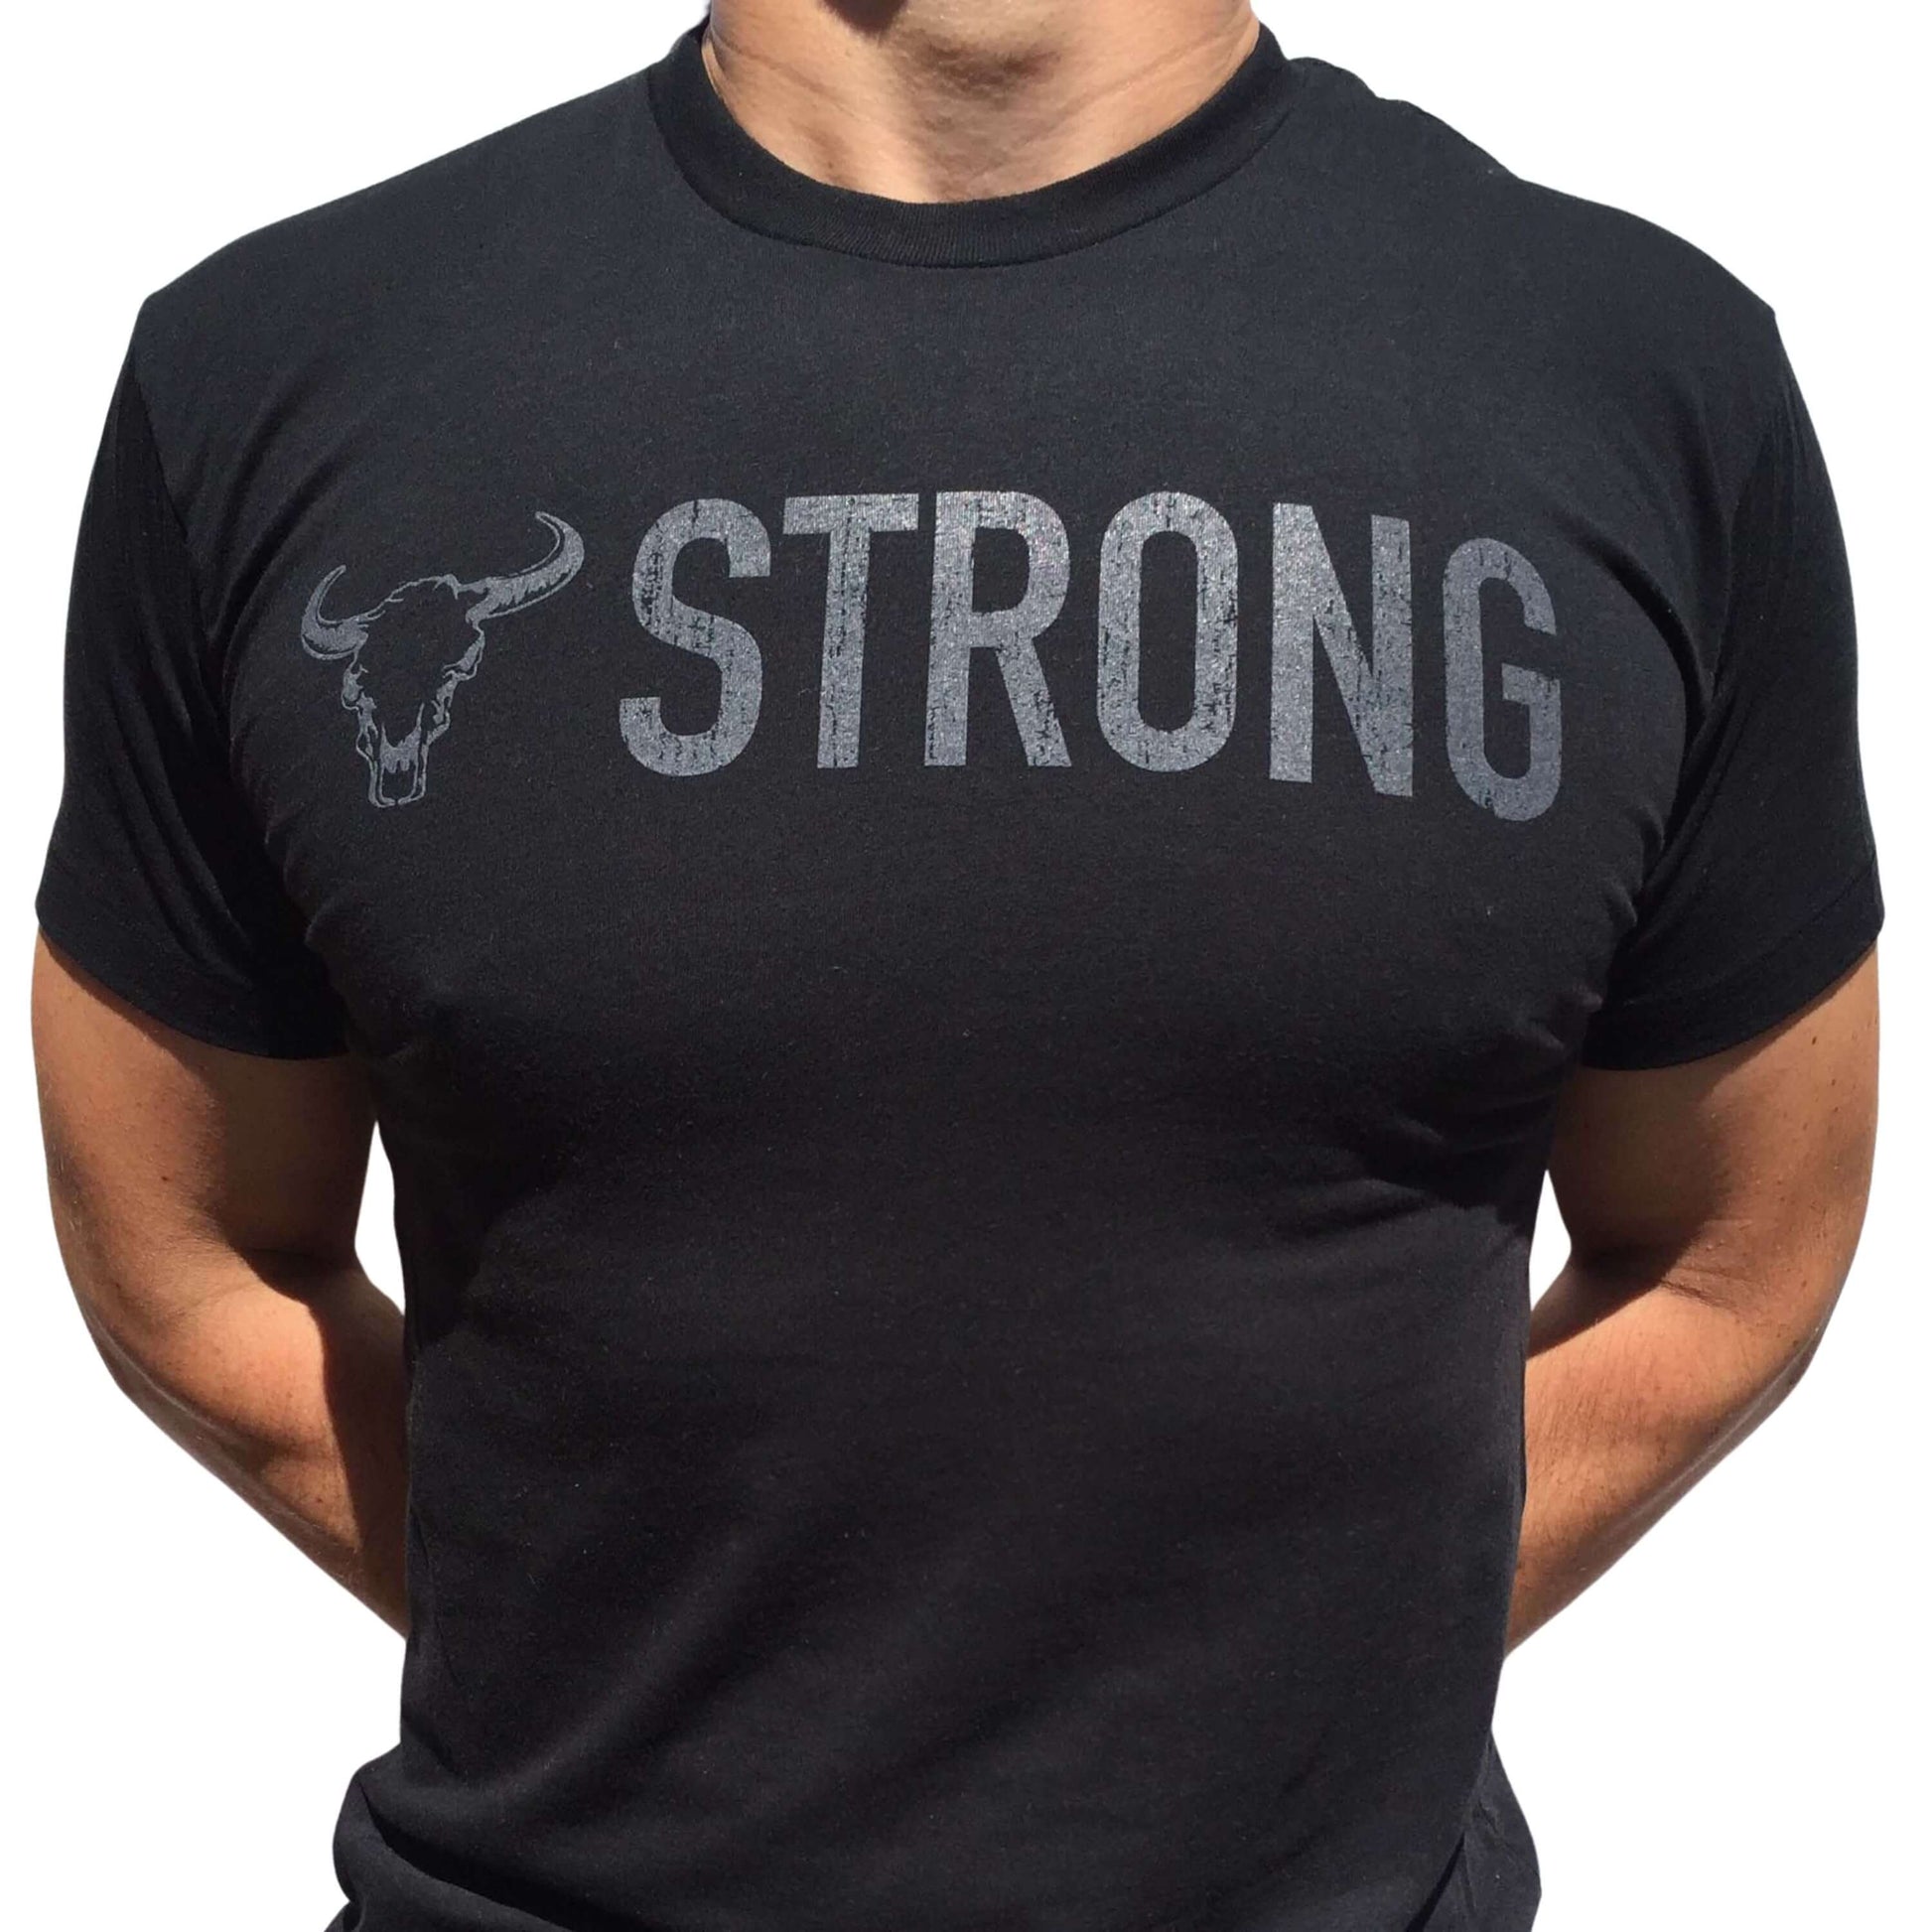 The 'Bull Strong' weightlifting shirt | Iron Strong Apparel